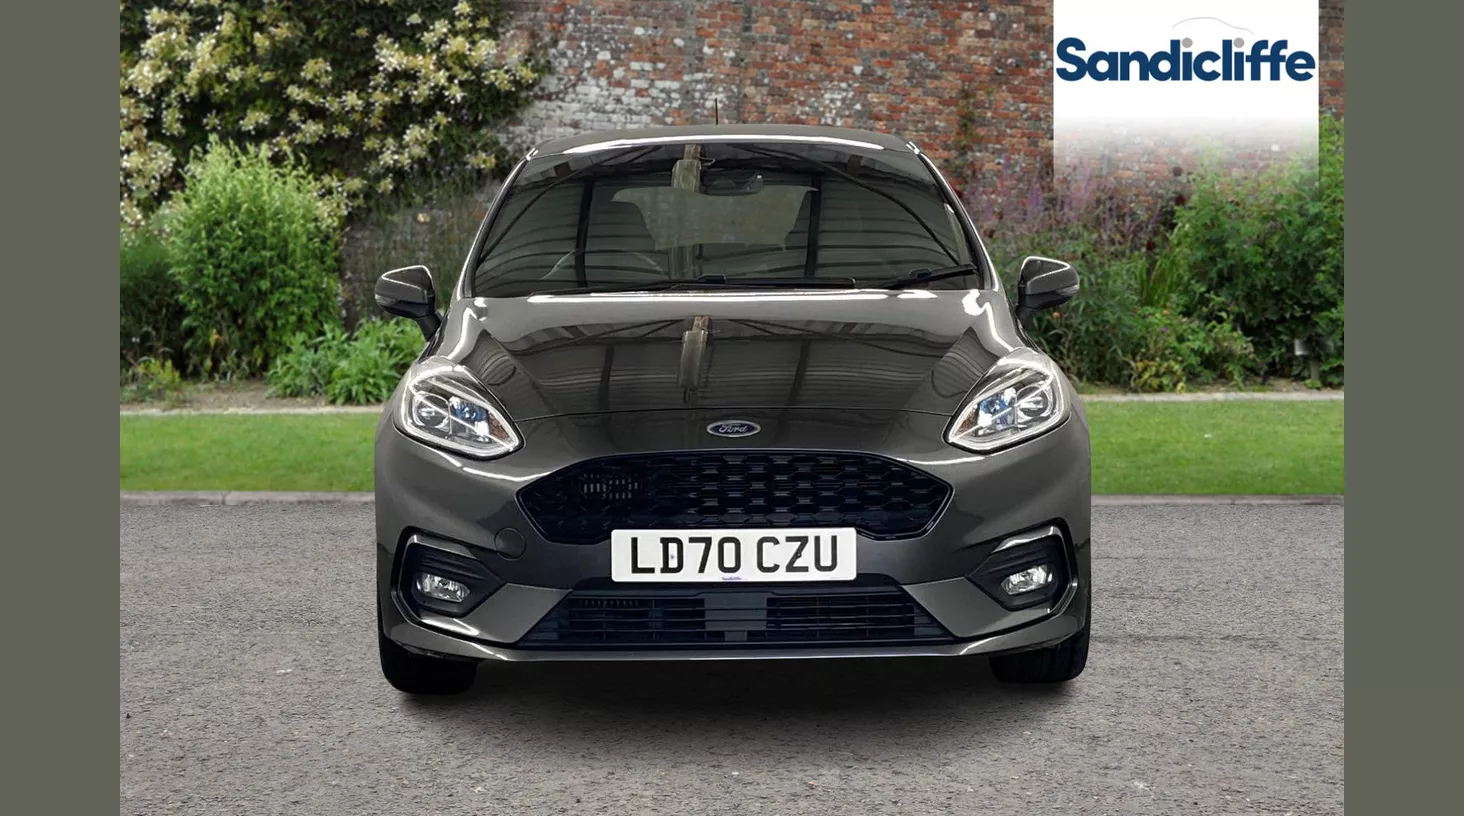 Ford Fiesta 1.0 EcoBoost 95 ST-Line X Edition 5dr